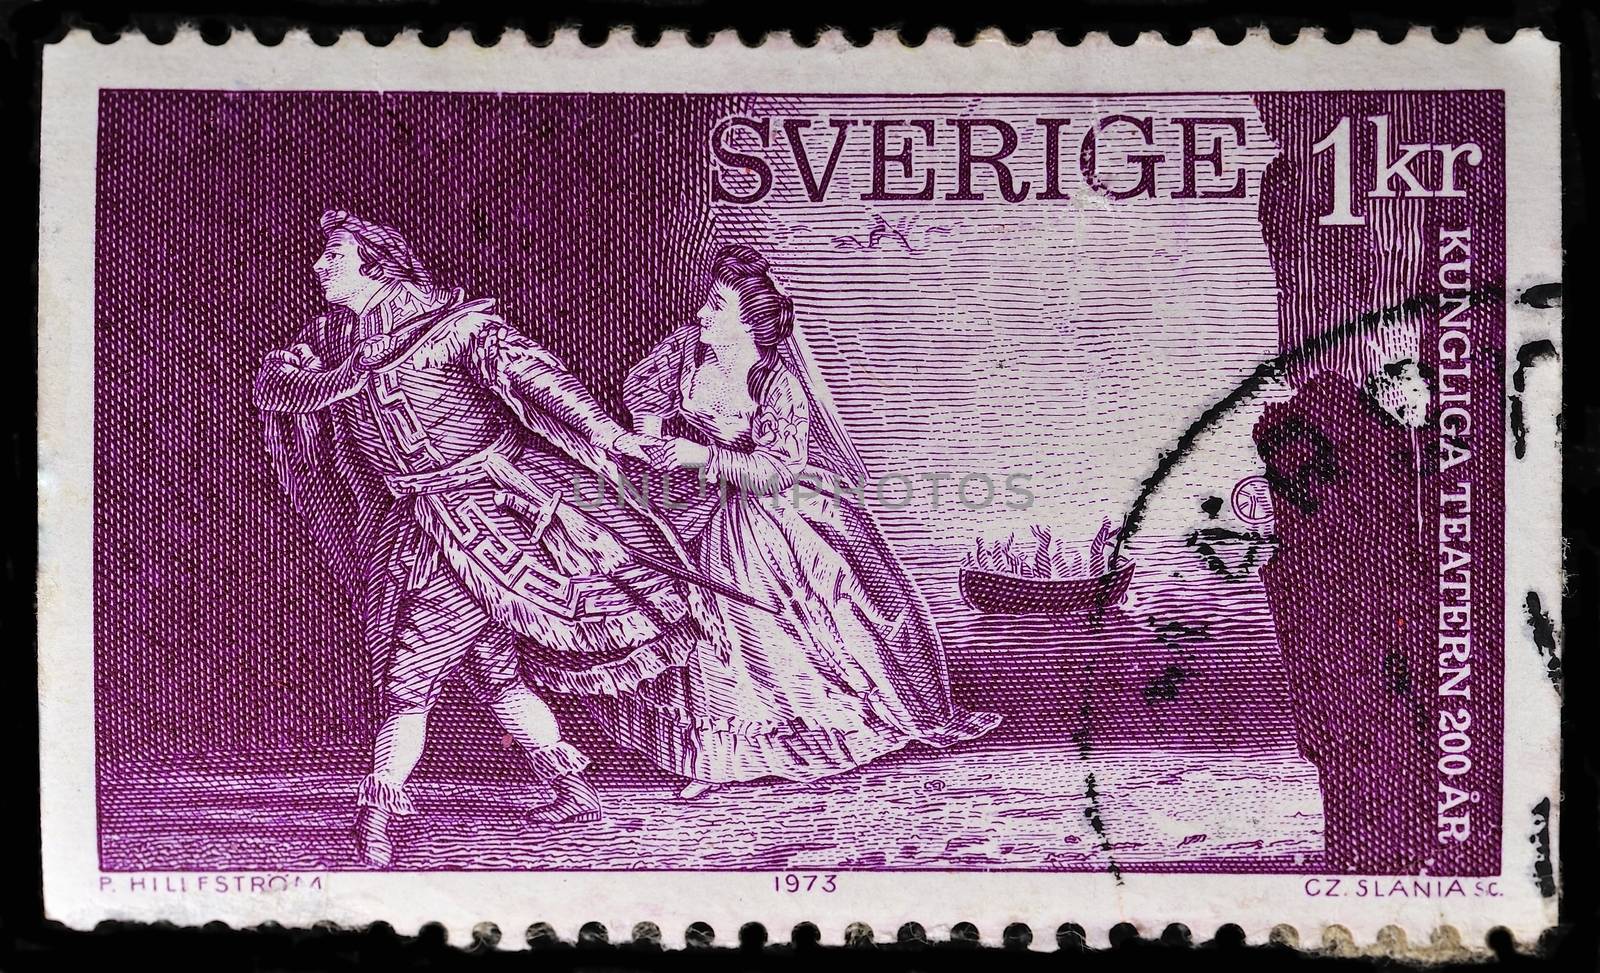 SWEDEN - CIRCA 1973: stamp printed by Sweden, shows Orpheus and Eurydice by Christoph Gluck, circa 1973